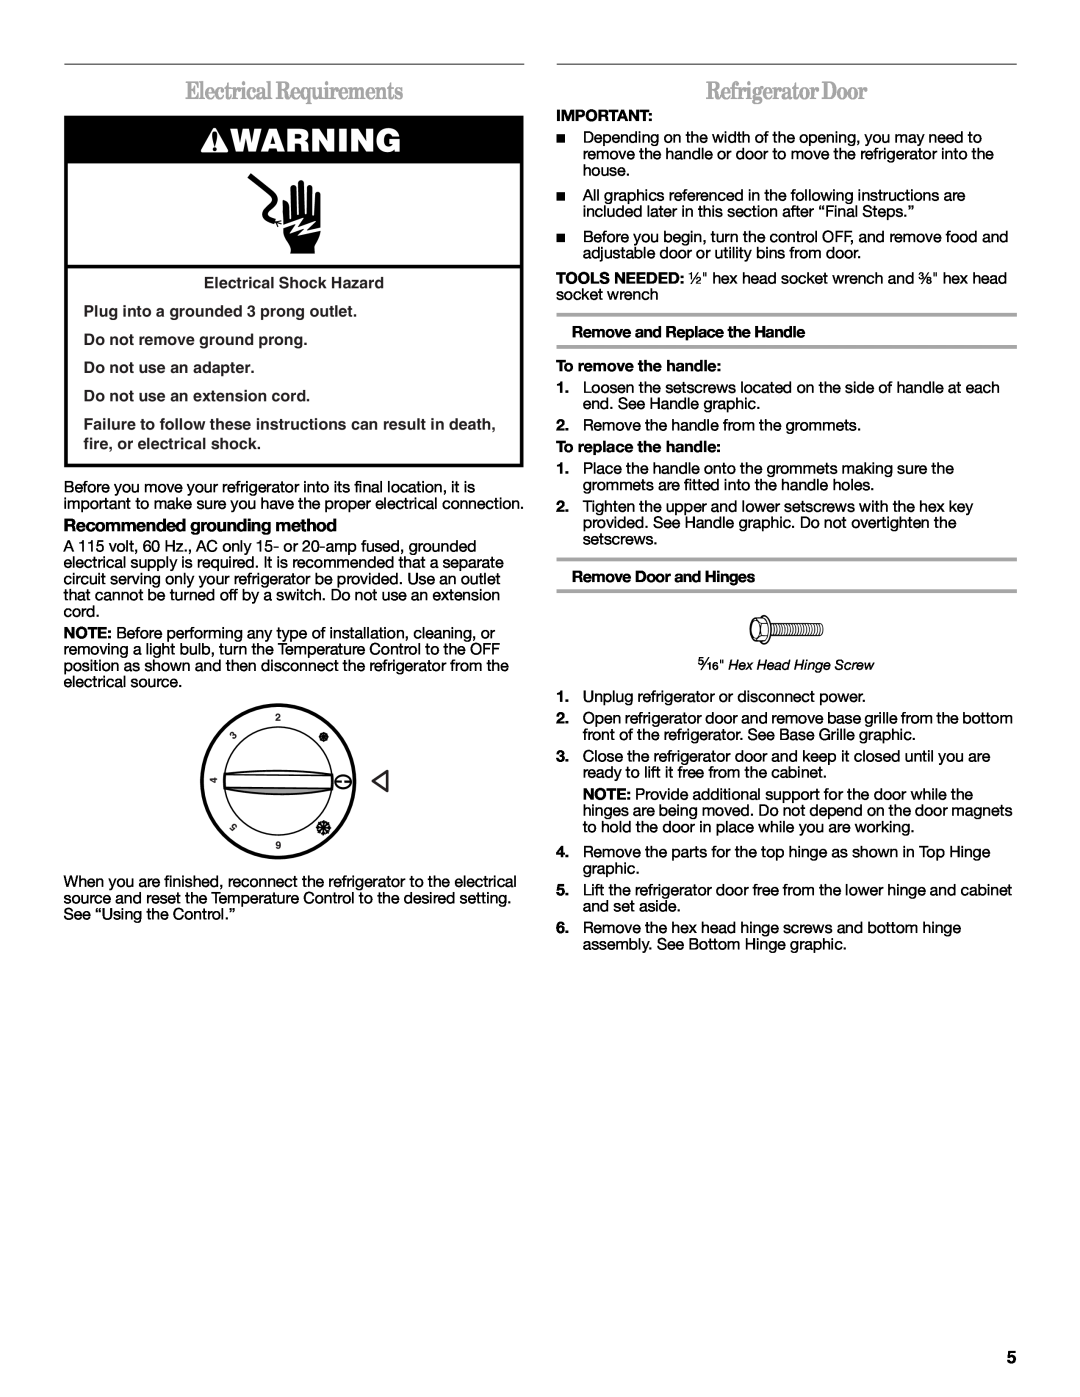 Whirlpool W10326802B manual Electrical Requirements, Refrigerator Door, Recommended grounding method, To replace the handle 